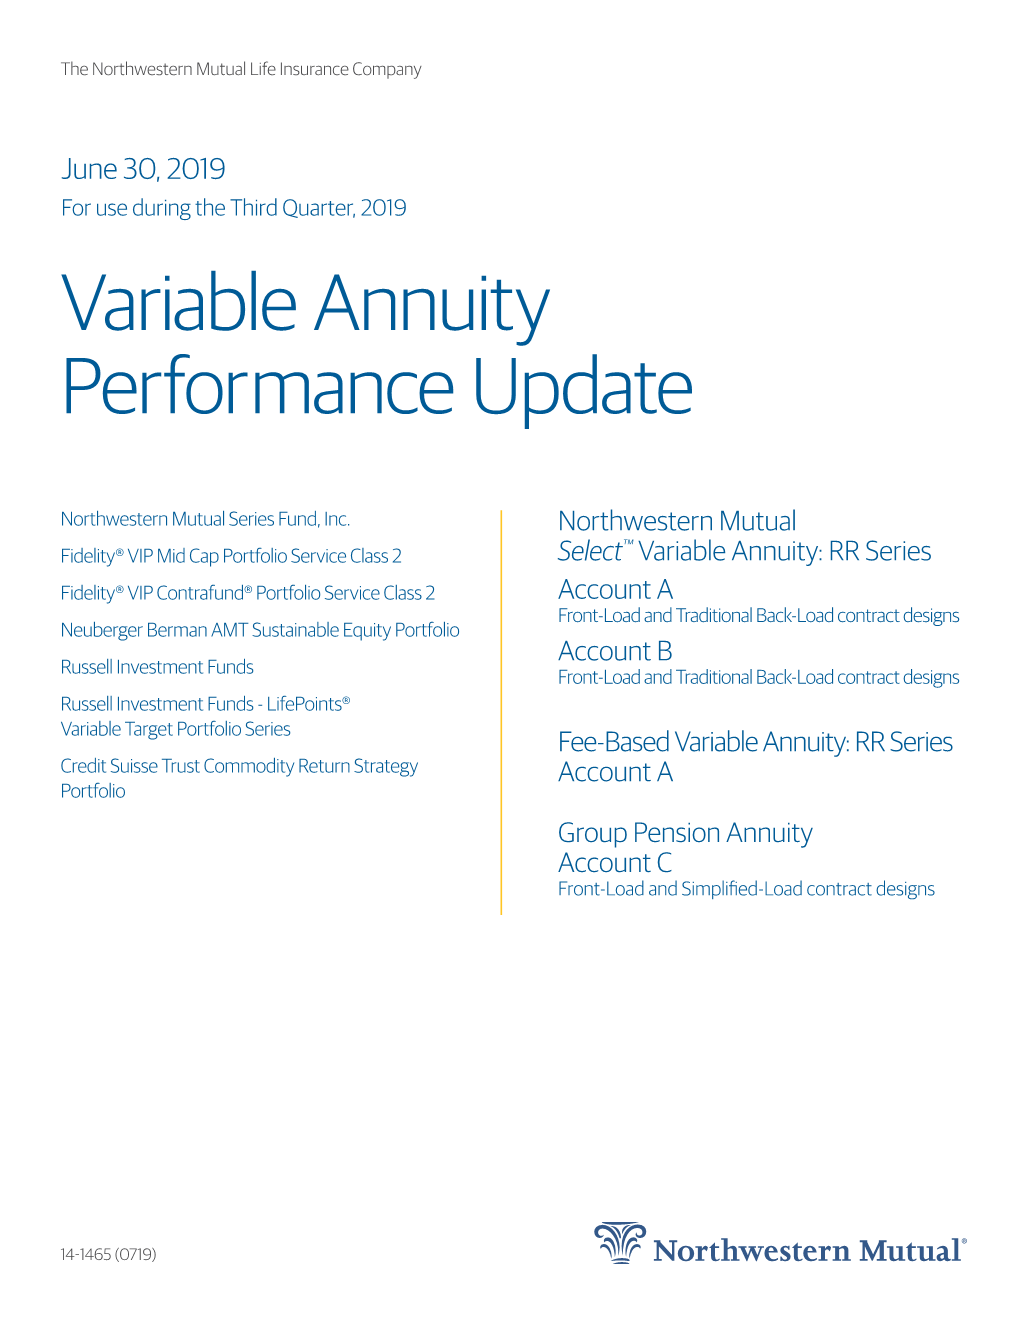 Variable Annuity Performance Update